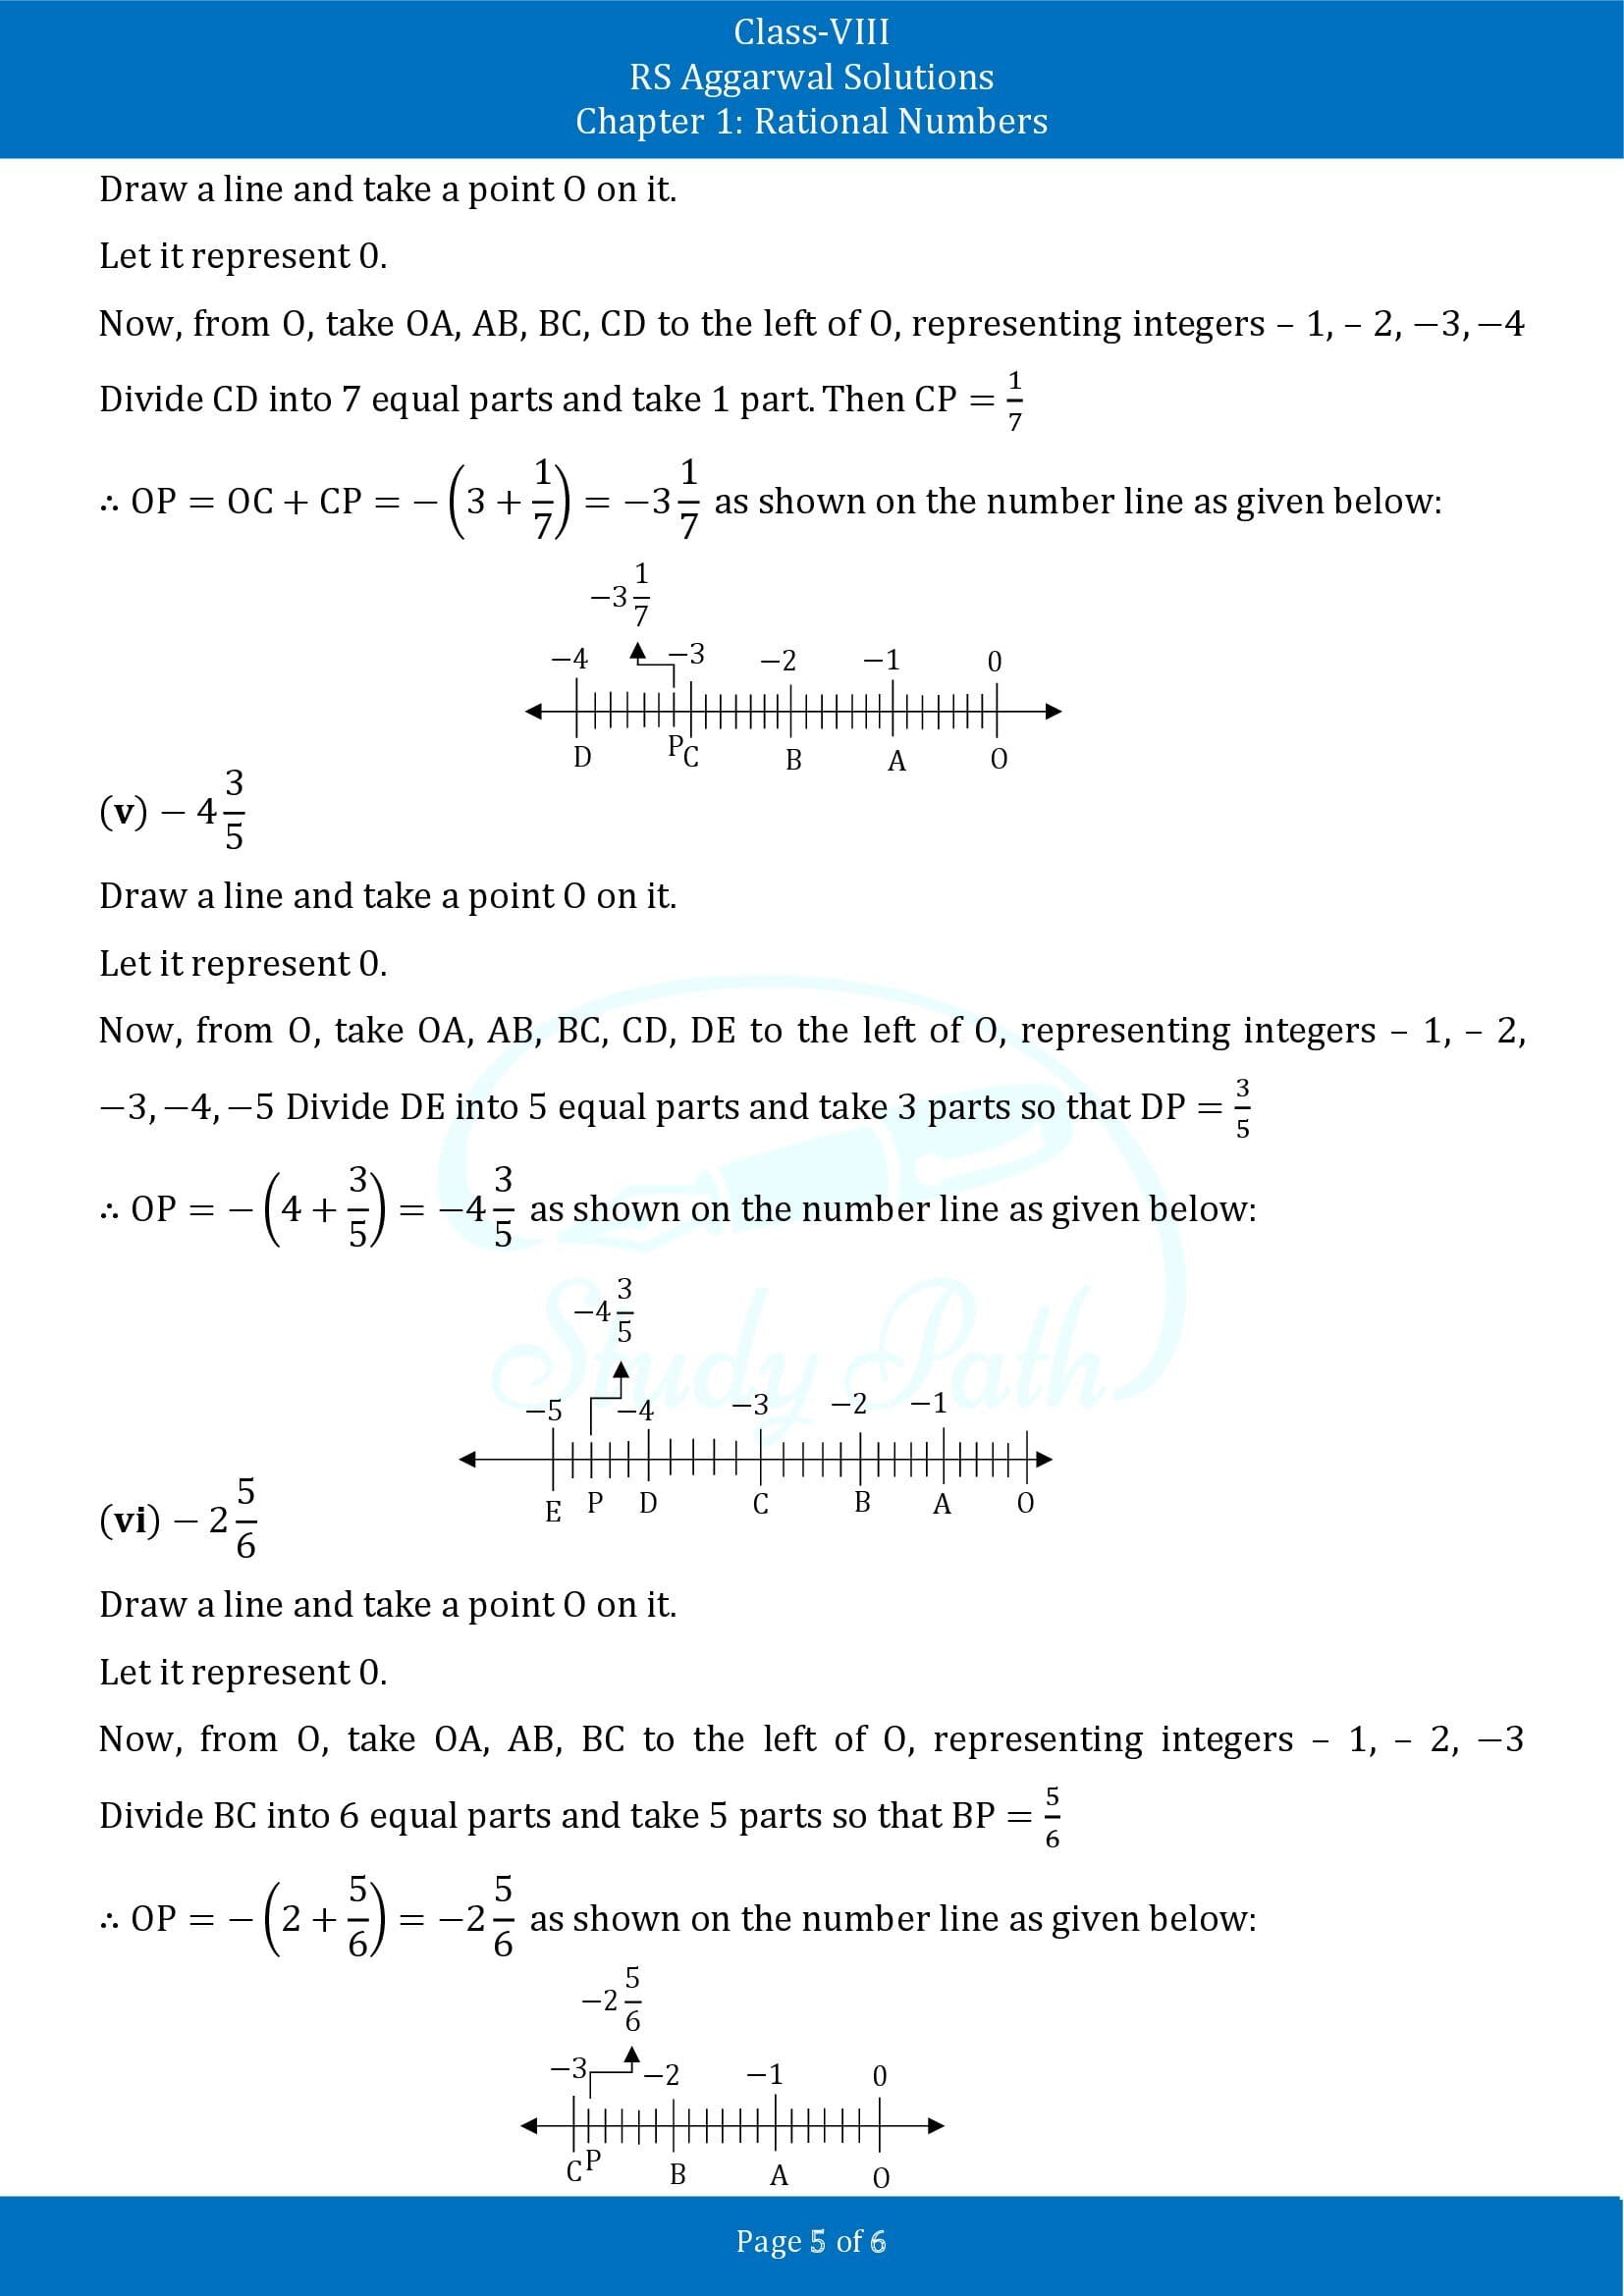 RS Aggarwal Solutions Class 8 Chapter 1 Rational Numbers Exercise 1B 00005